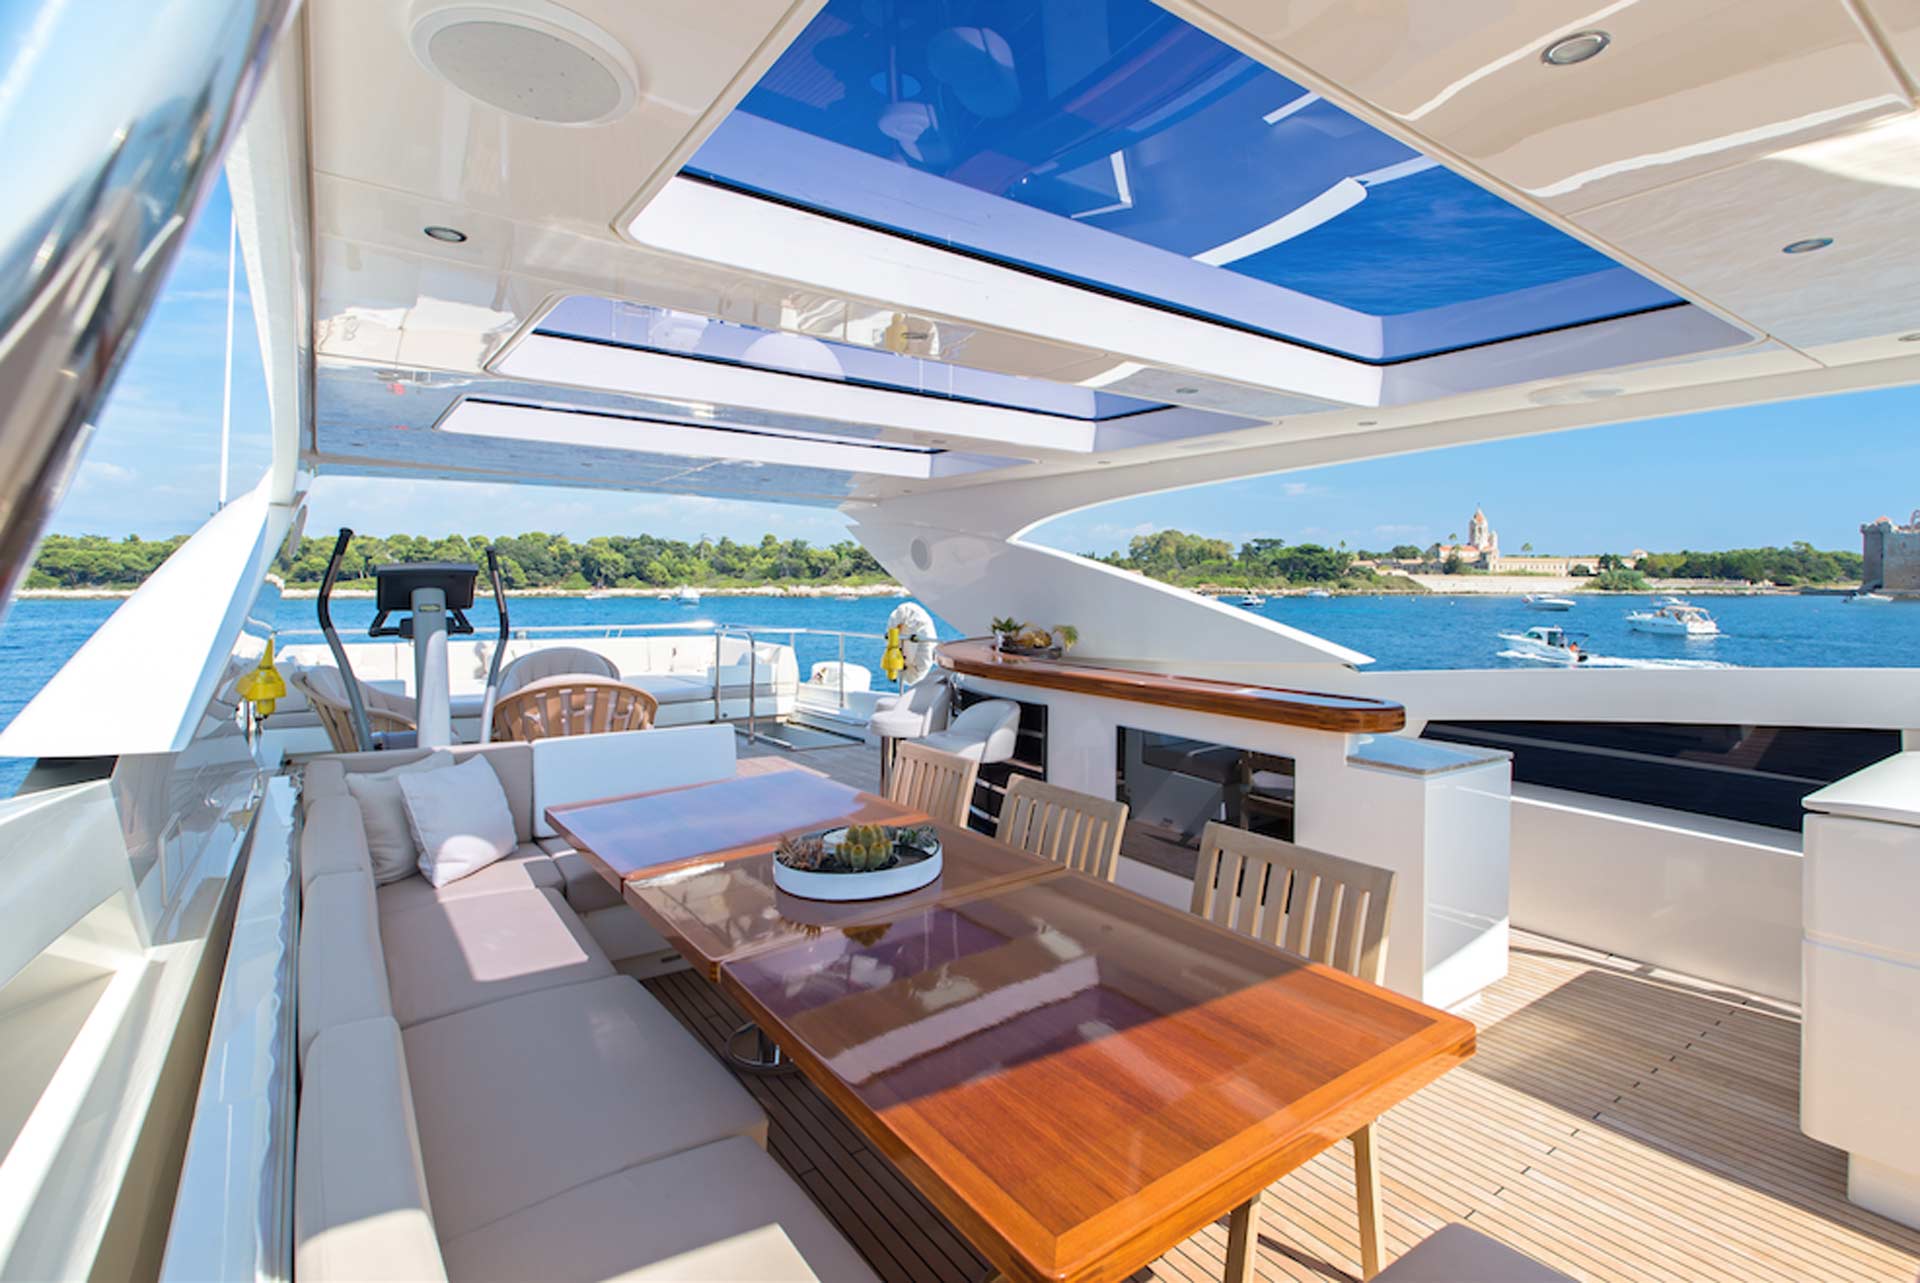 Take a breath of Yachting air